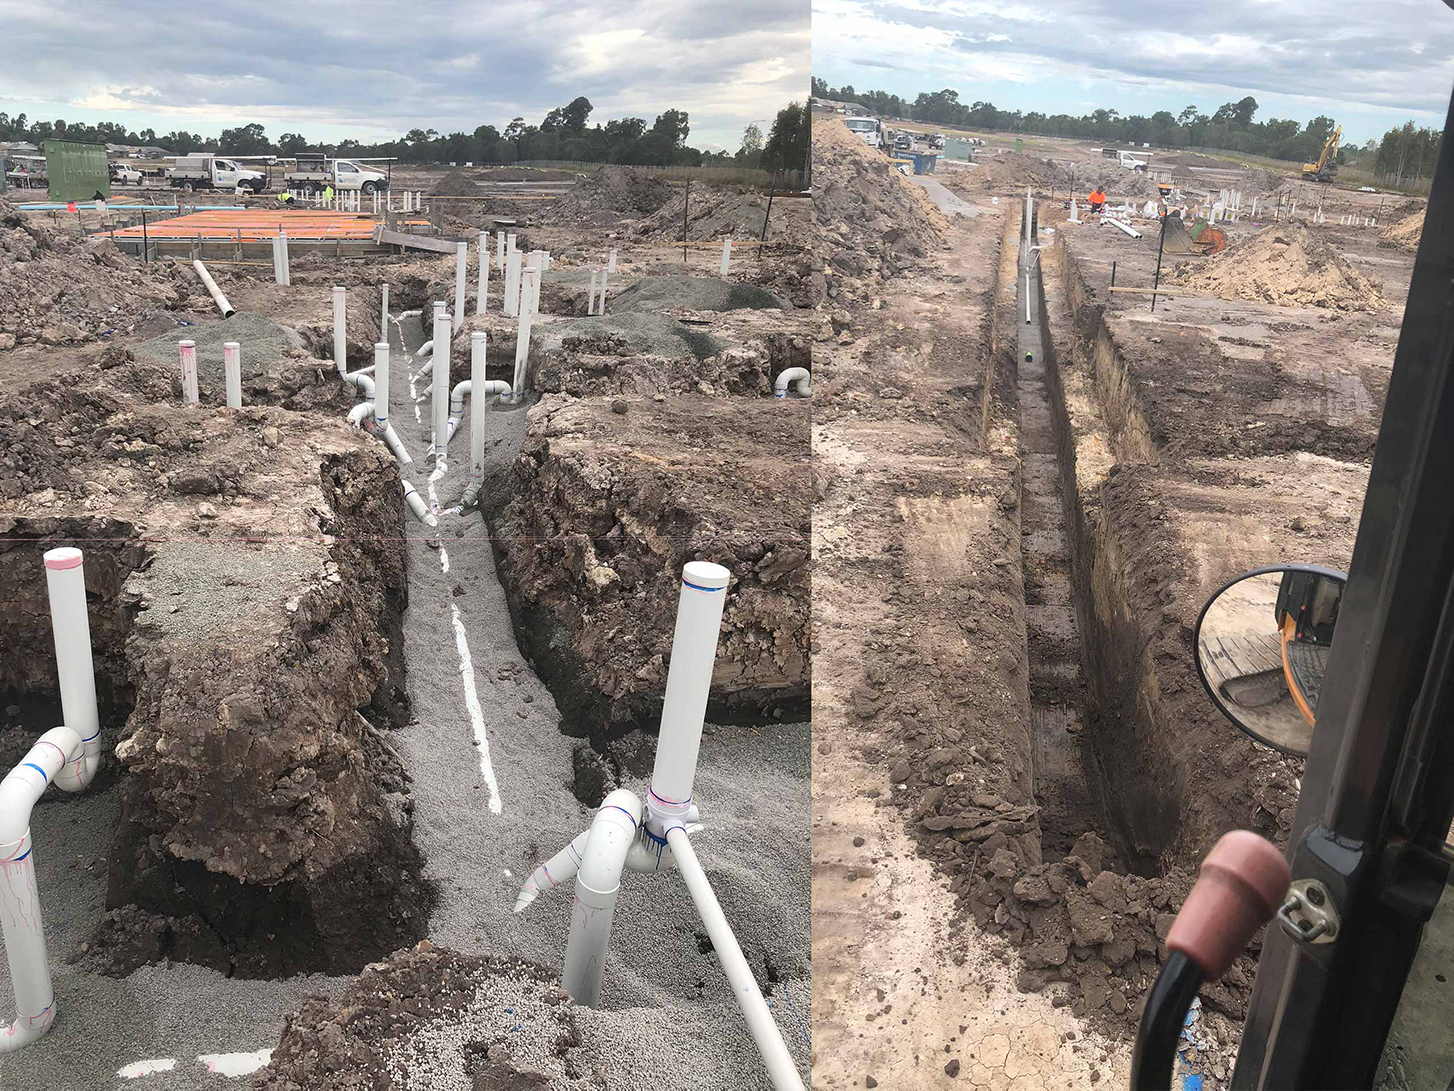 Excavation - progress of digging trenches for commercial drainage